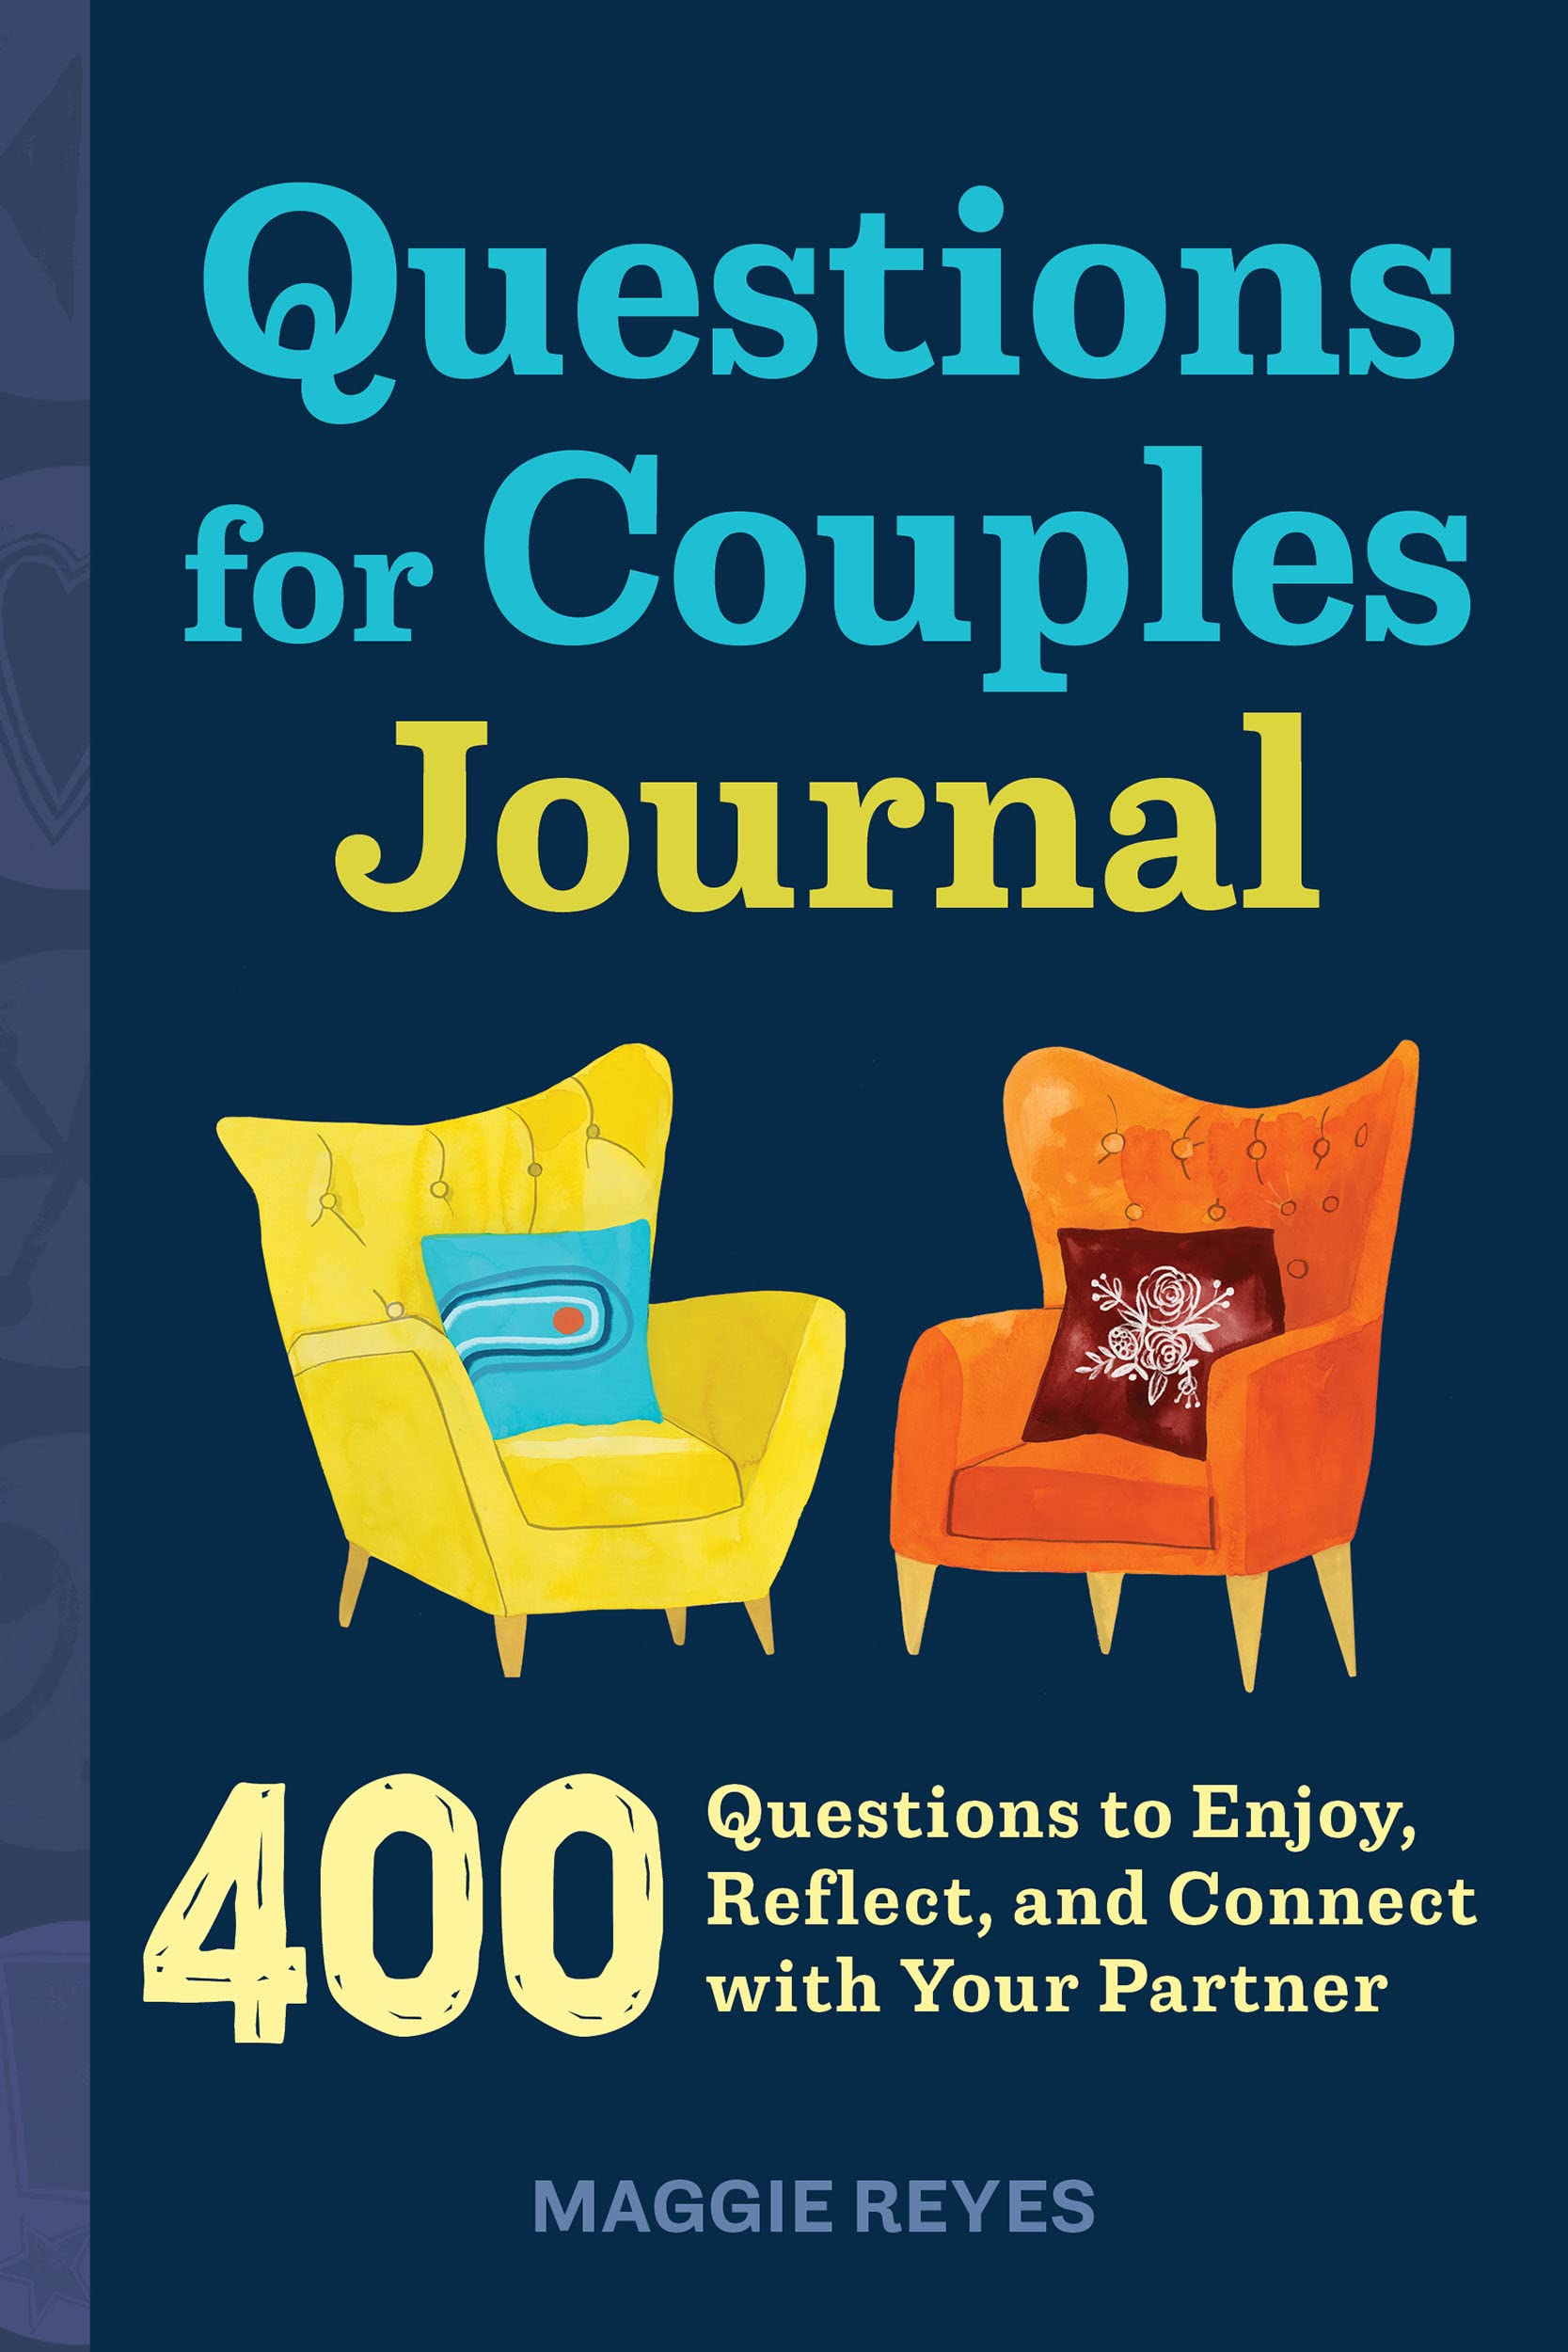 Questions for Couples Journal: 400 Questions to Enjoy, Reflect, and Connect with Your Partner (Relationship Books for Couples) - SureShot Books Publishing LLC